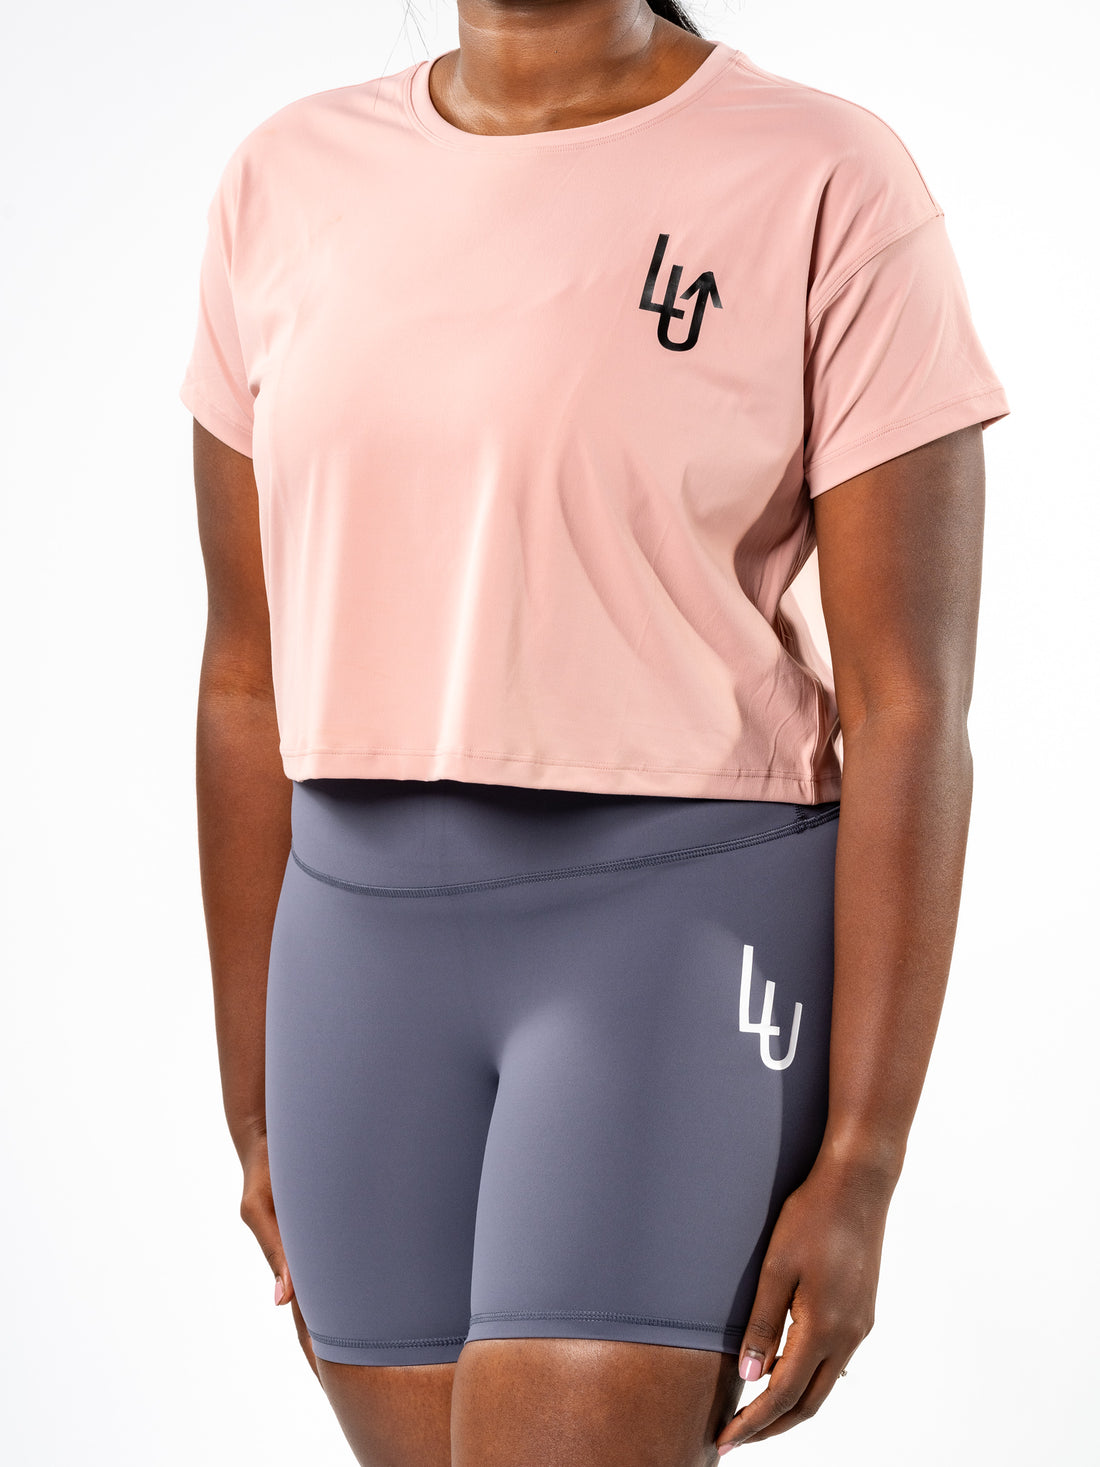 Cropped short sleeve - Pink